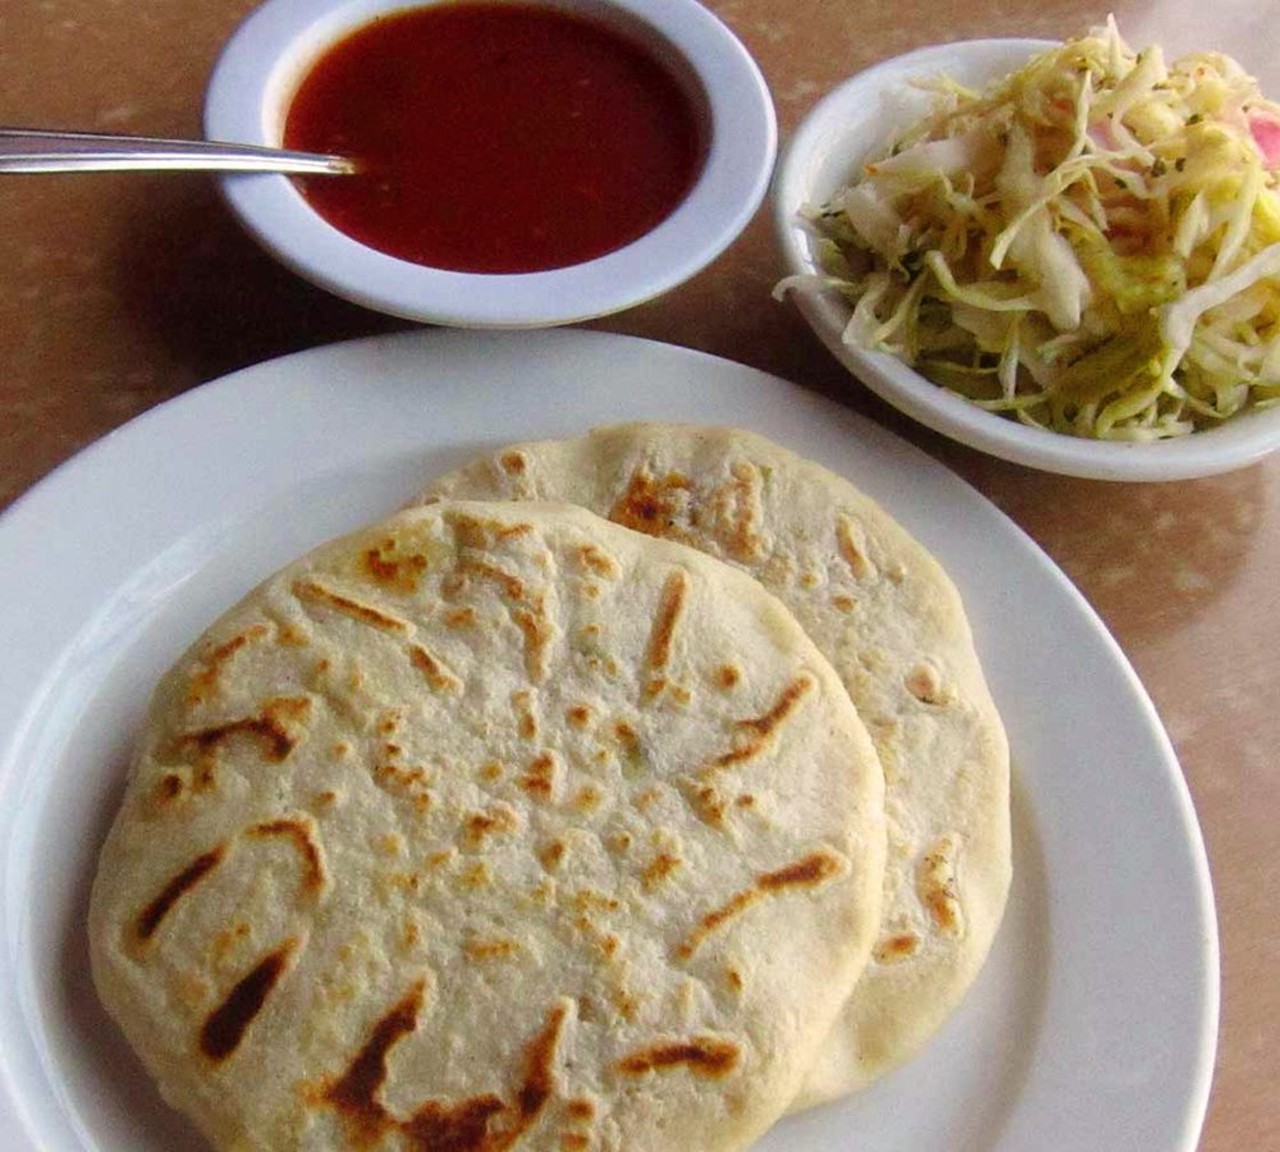 Pupusas | Pupuser&iacute;a y Restaurante Salvadore&ntilde;o  | $2.50/pupusa 
Detroit | 3149 Livernois Ave. | (313) 899-4020 
A pupusa is a flat pancake stuffed with an assortment of different meats and/or cheeses. The menu is extensive and the possible combinations are limitless. 
(Photo: